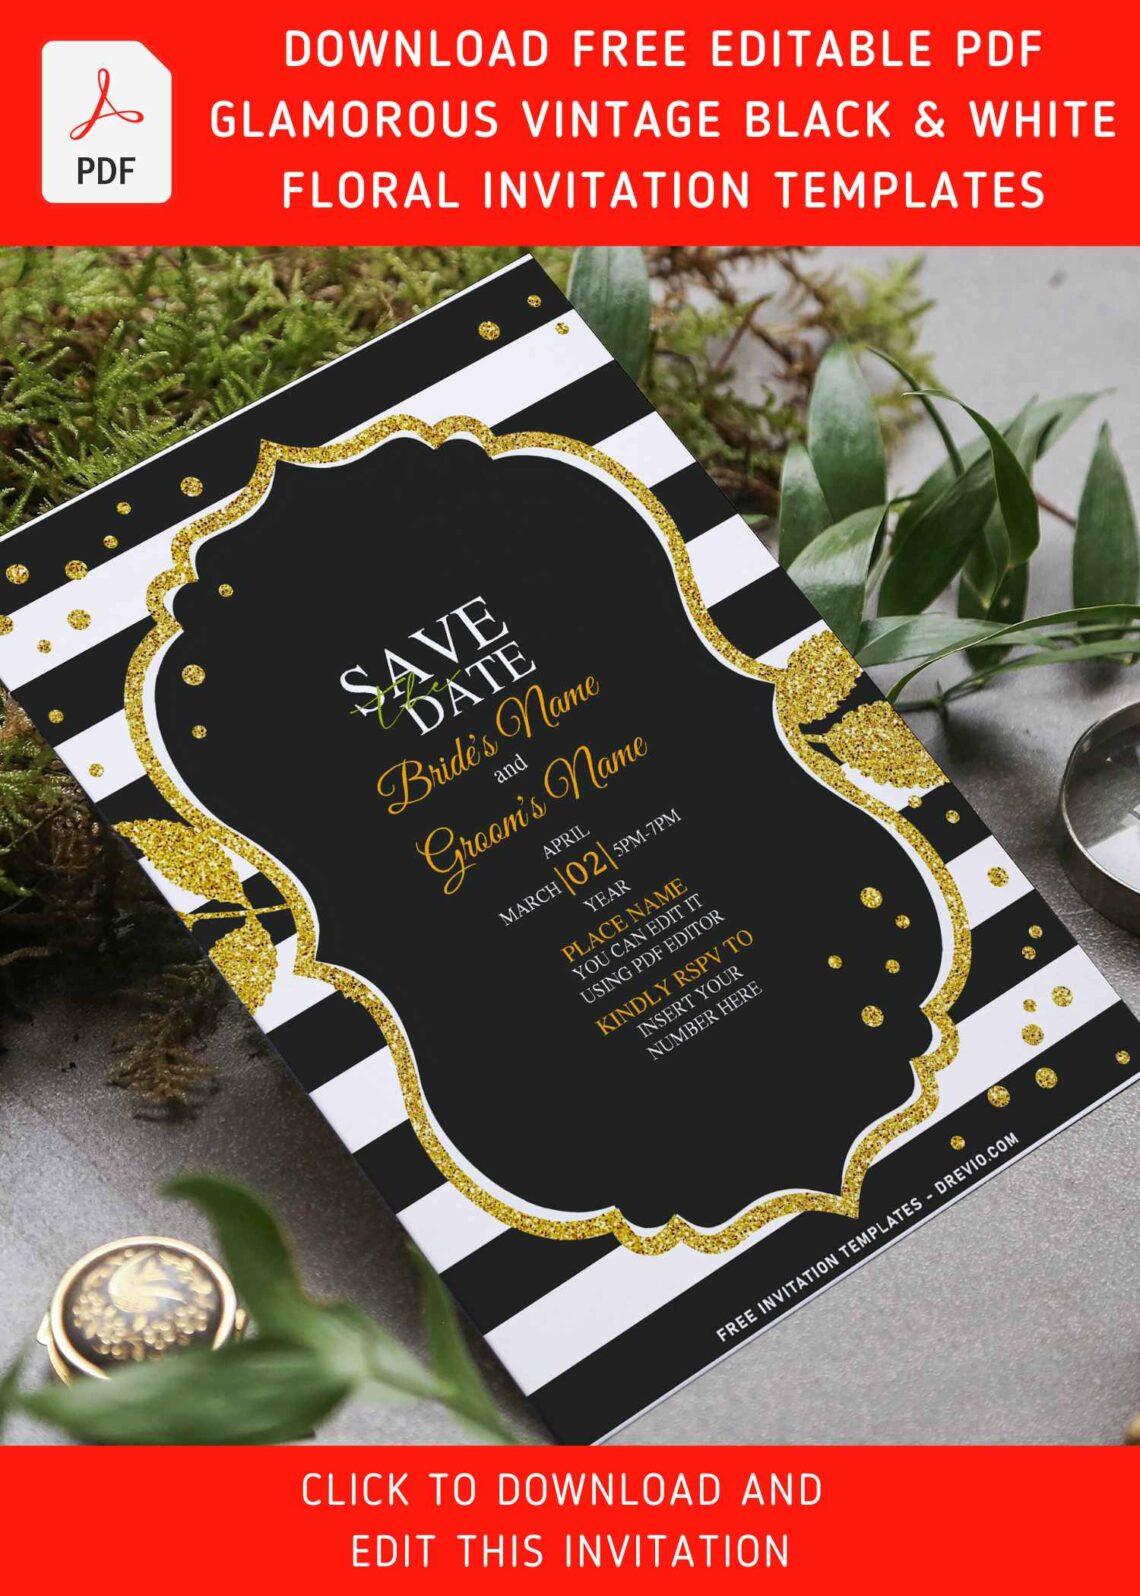 (Free Editable PDF) Vintage Sparkling Black And White Floral Wedding Invitation Templates with gleaming gold glitters